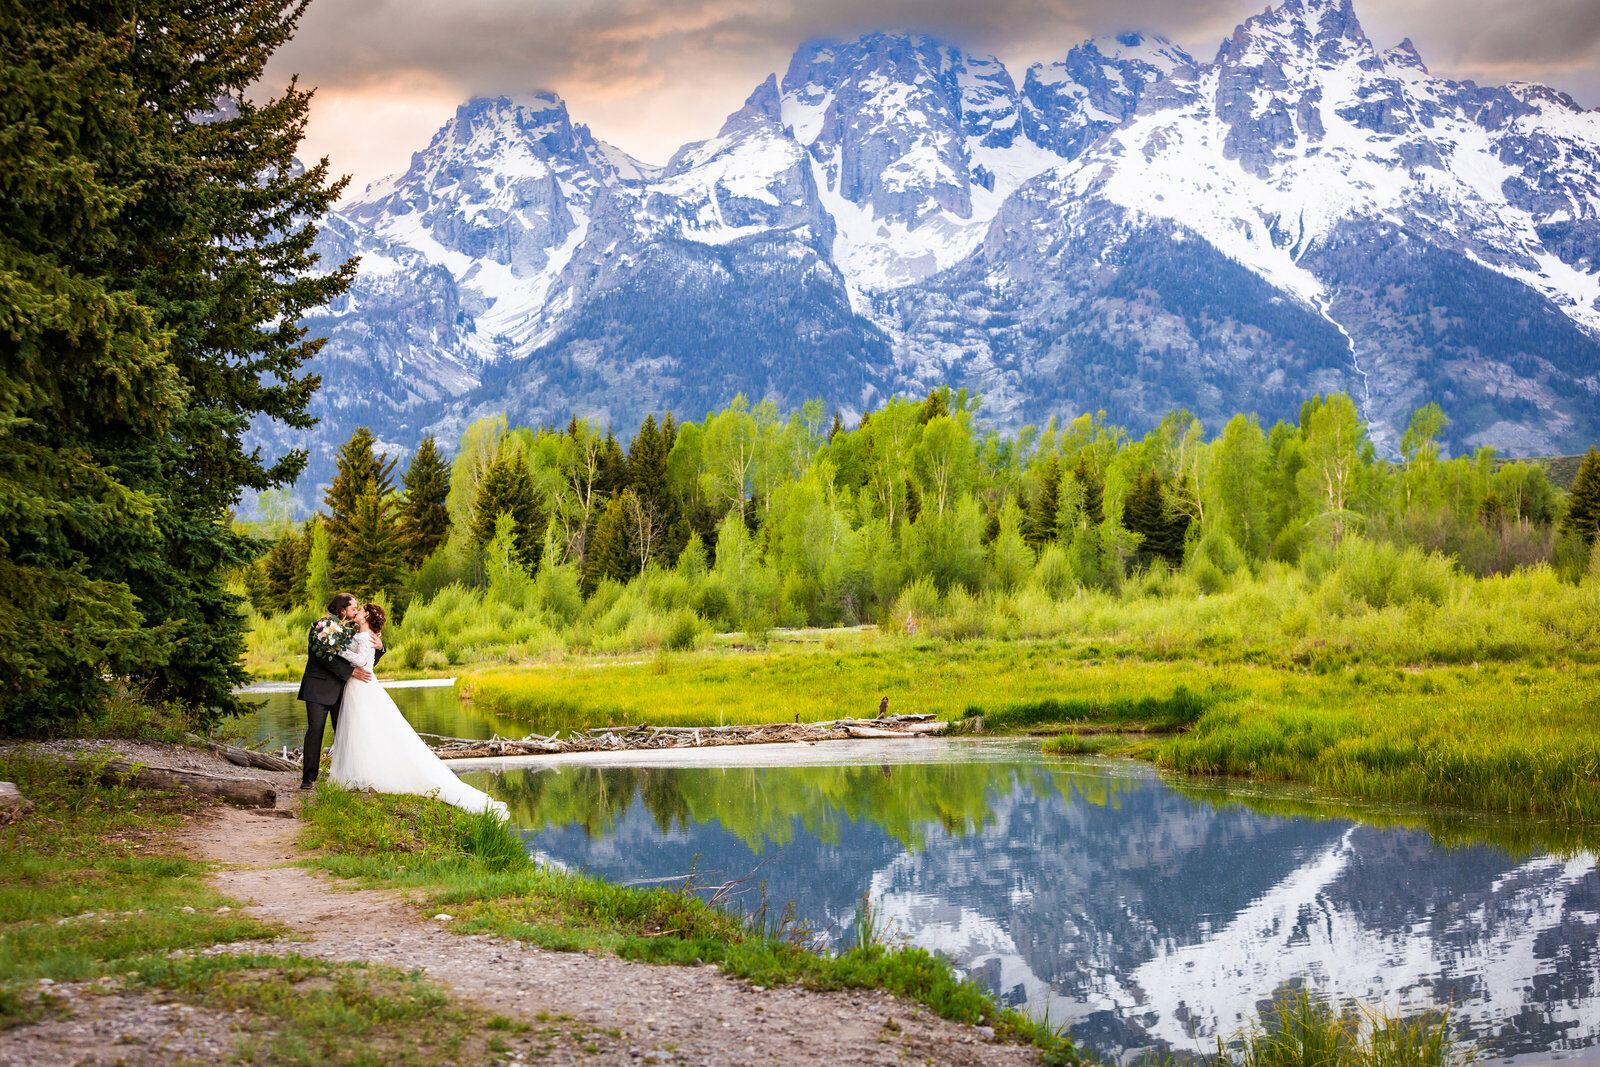 summer sunset jackson hole elopement with bright and vibrant colors. grand tetons are blue, sky is orange, foliage is green, and frame the kissing couple perfectly.